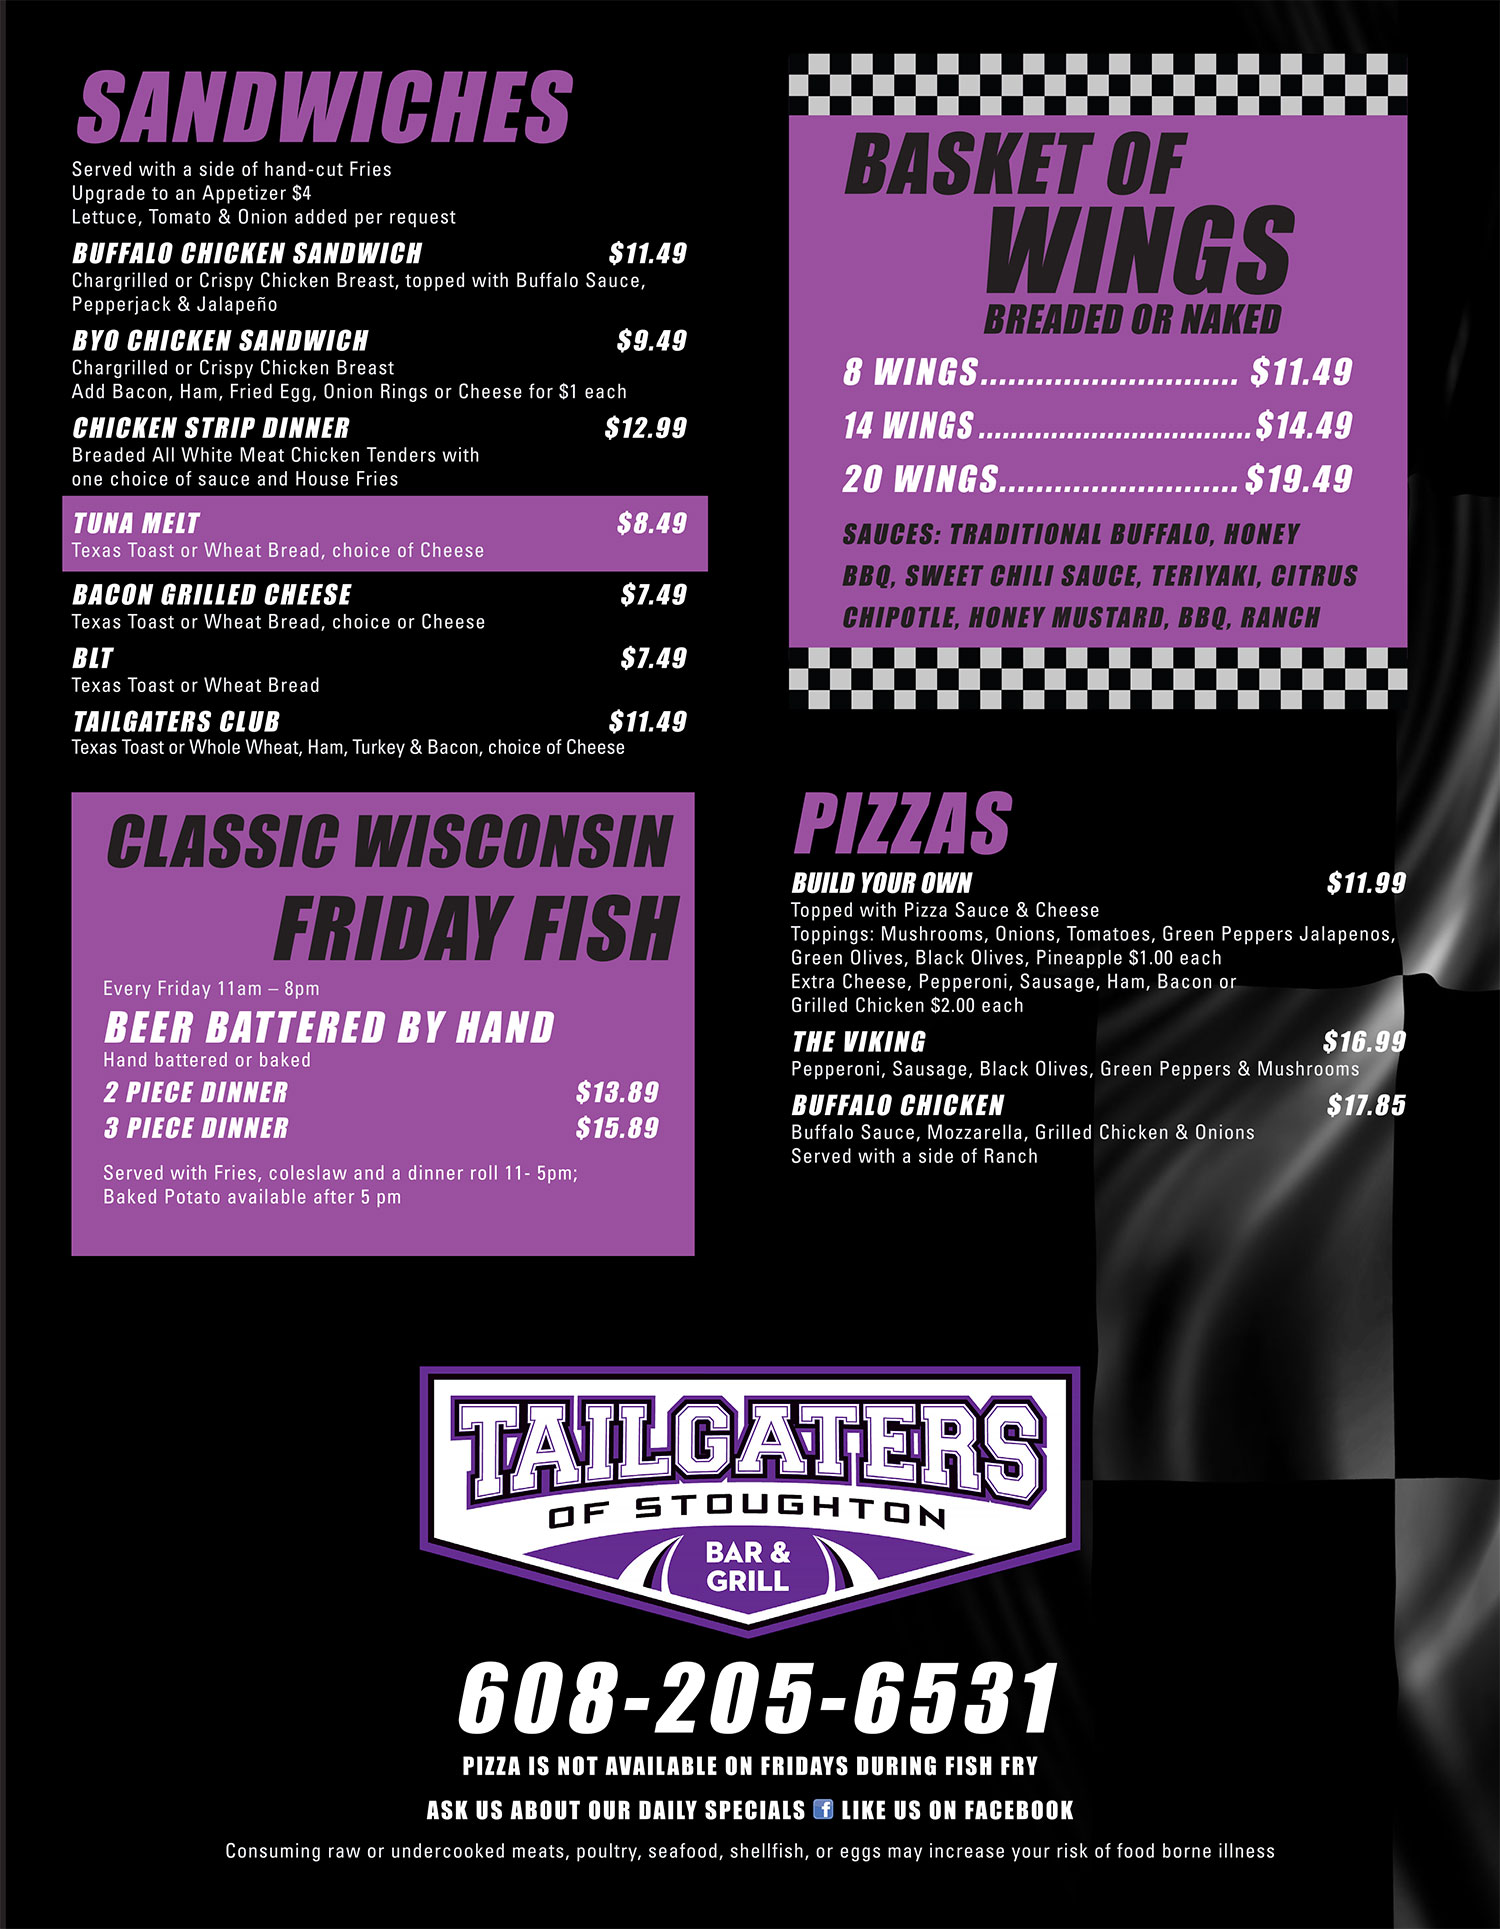 Stoughton Tailgater's Bar & Grill